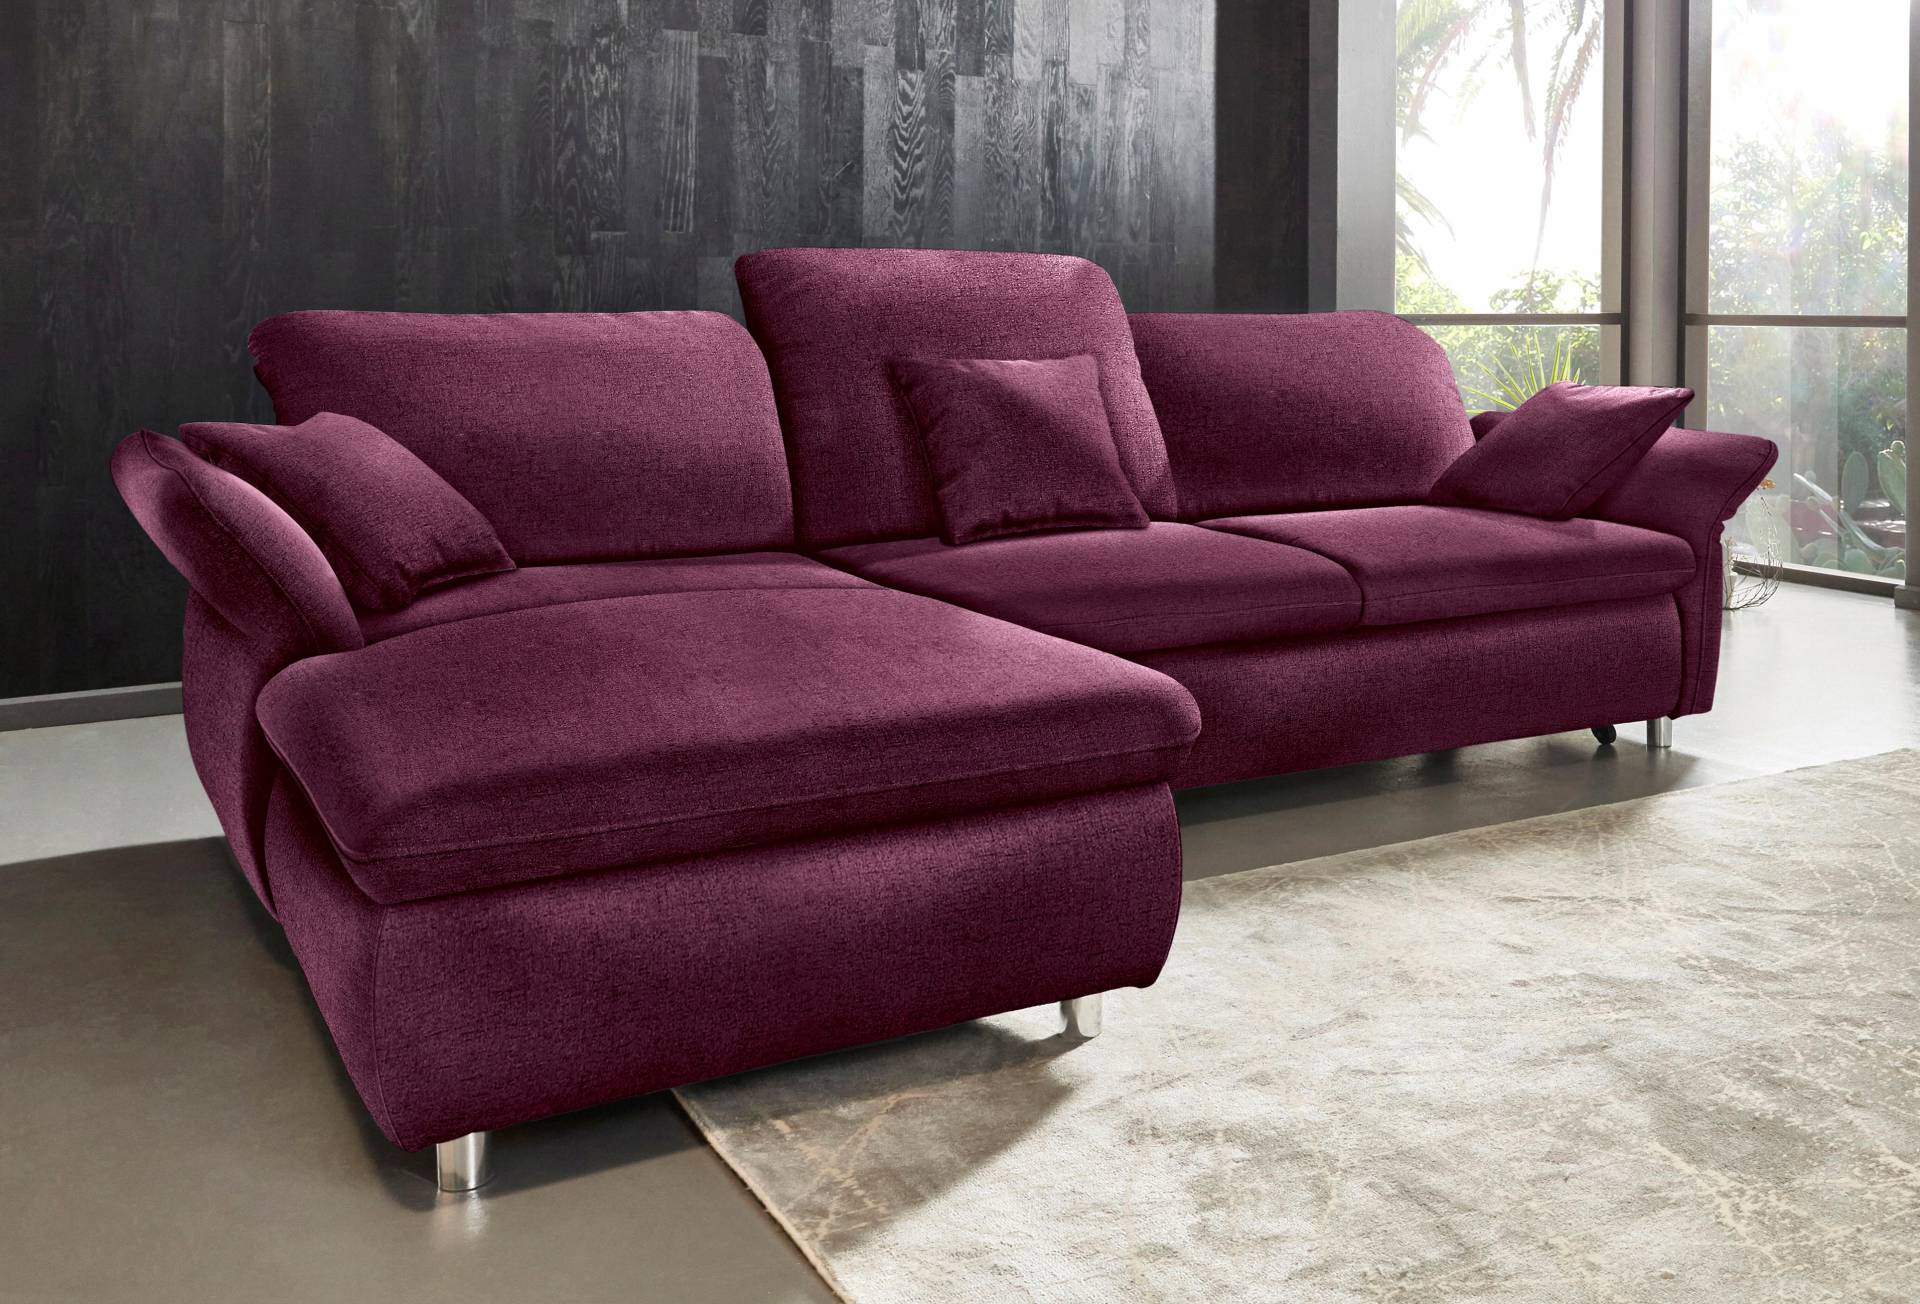 Places of Style Ecksofa »Smoothie L-Form« von PLACES OF STYLE